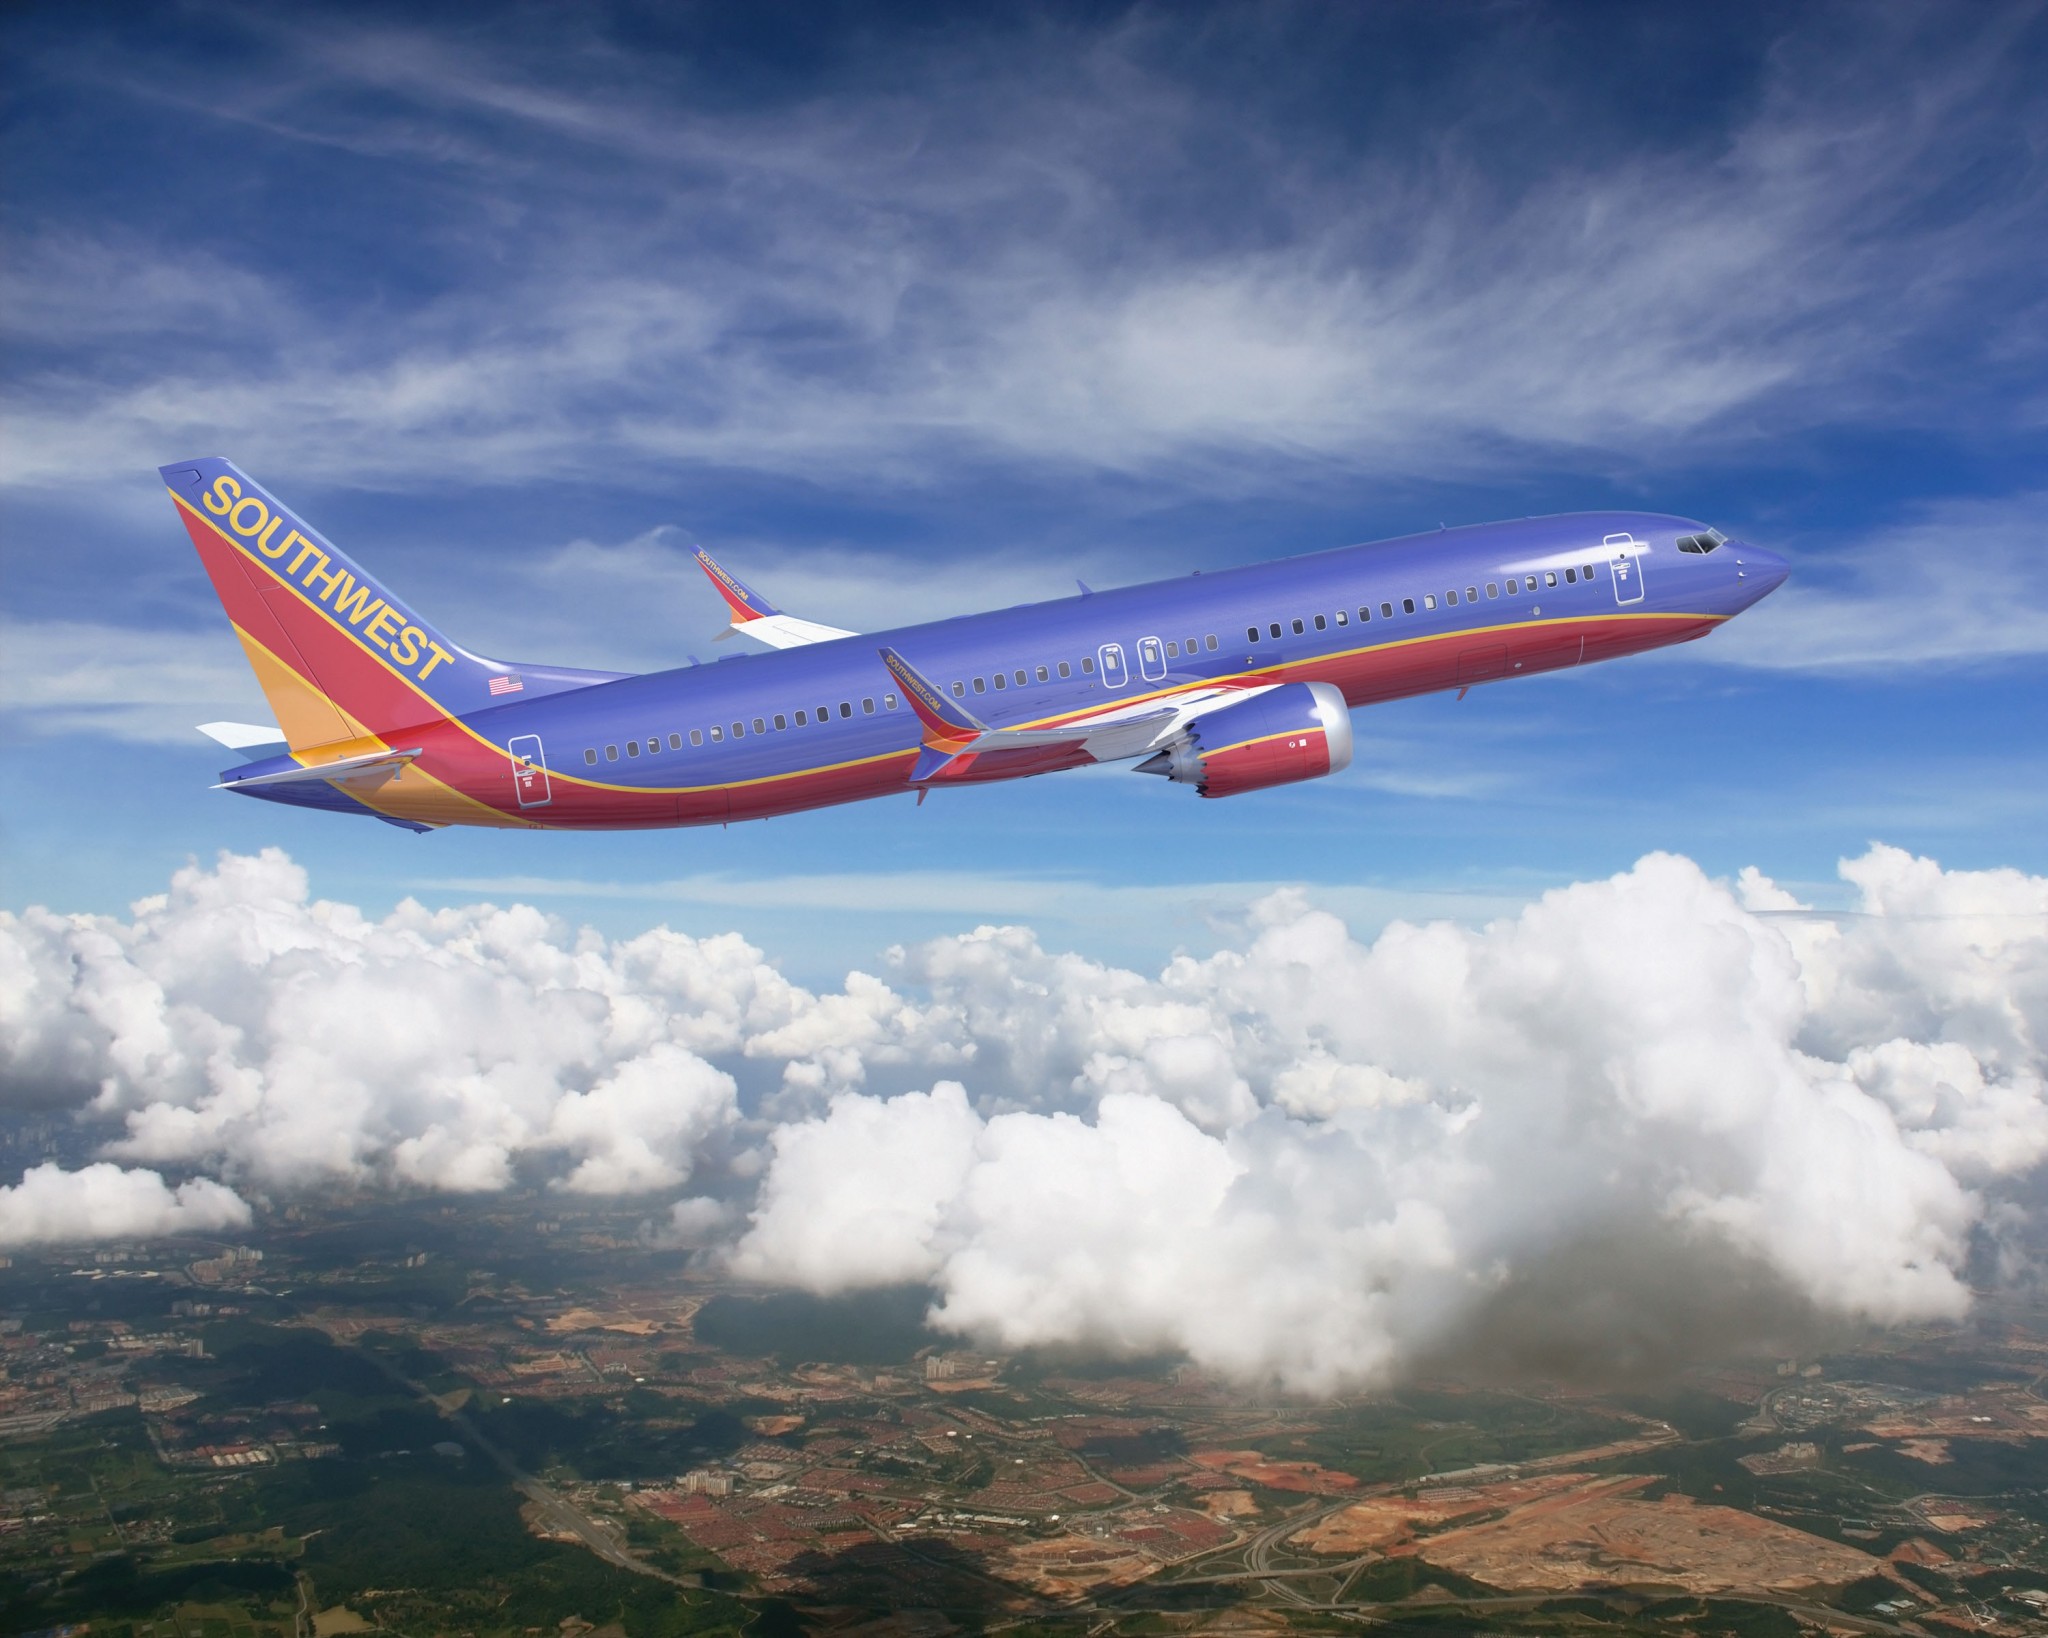 Emergency landing for Southwest Airlines